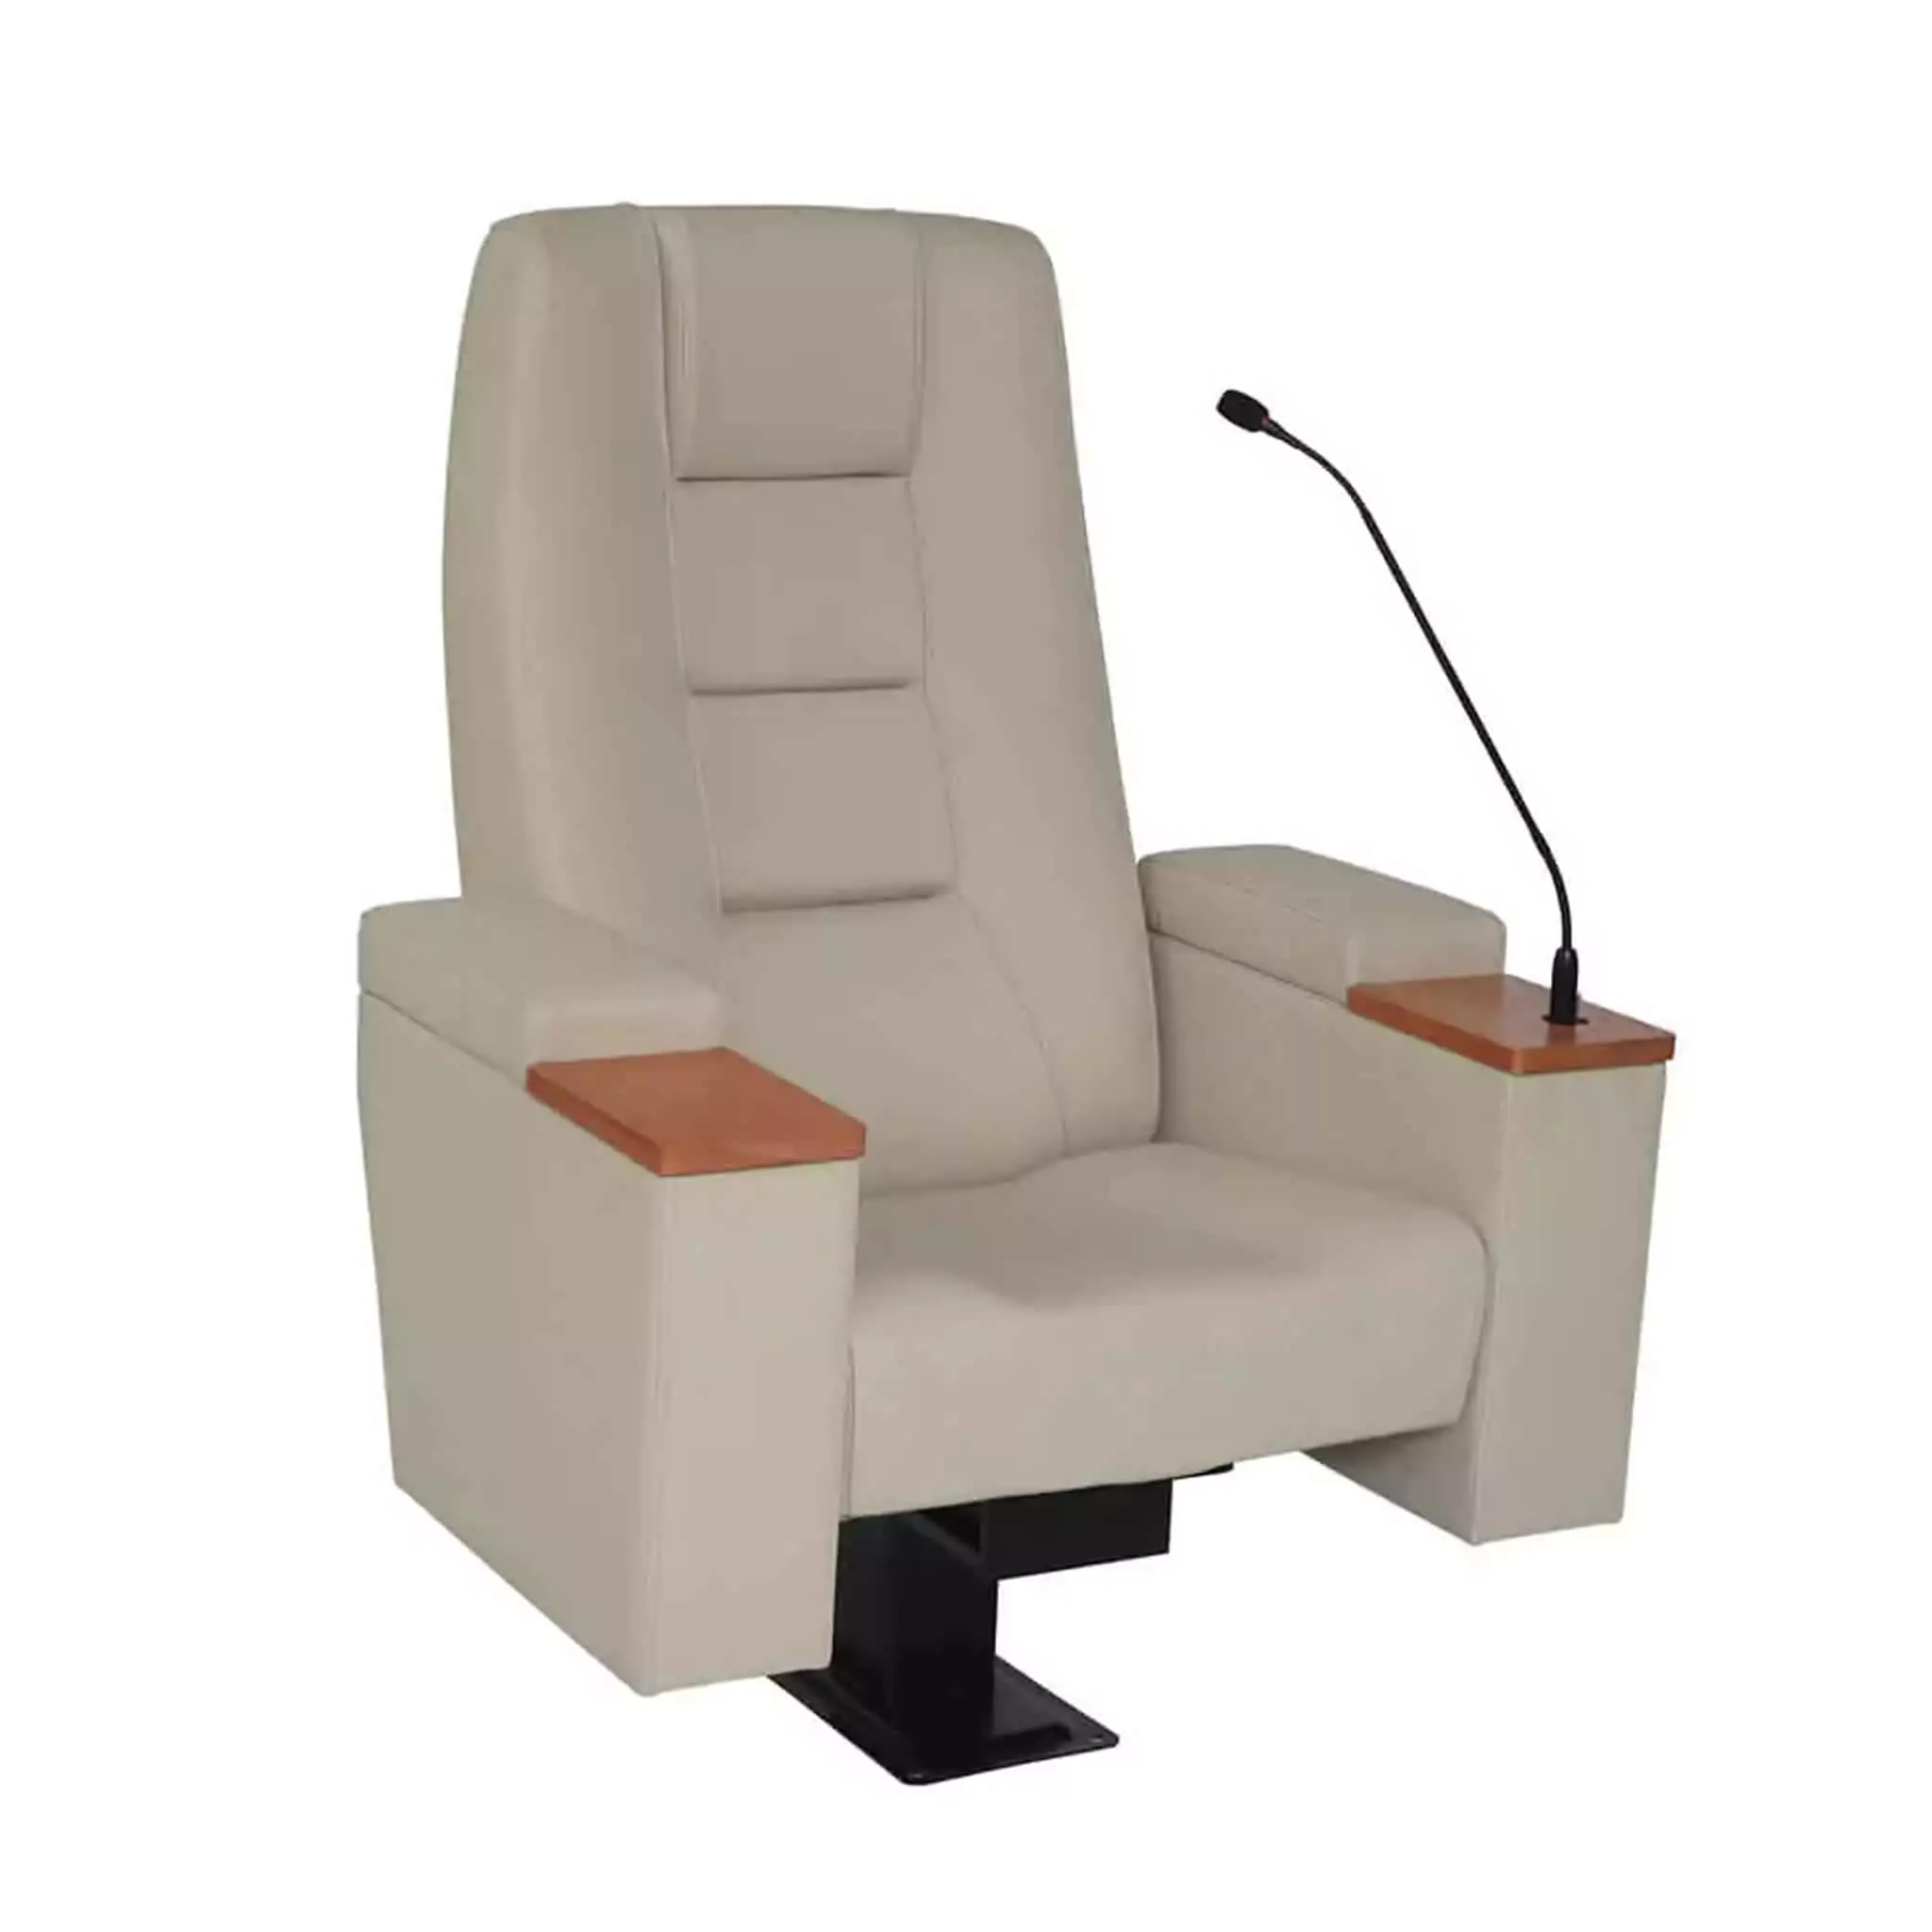 Simko Seating Products Conference Seat Ametist